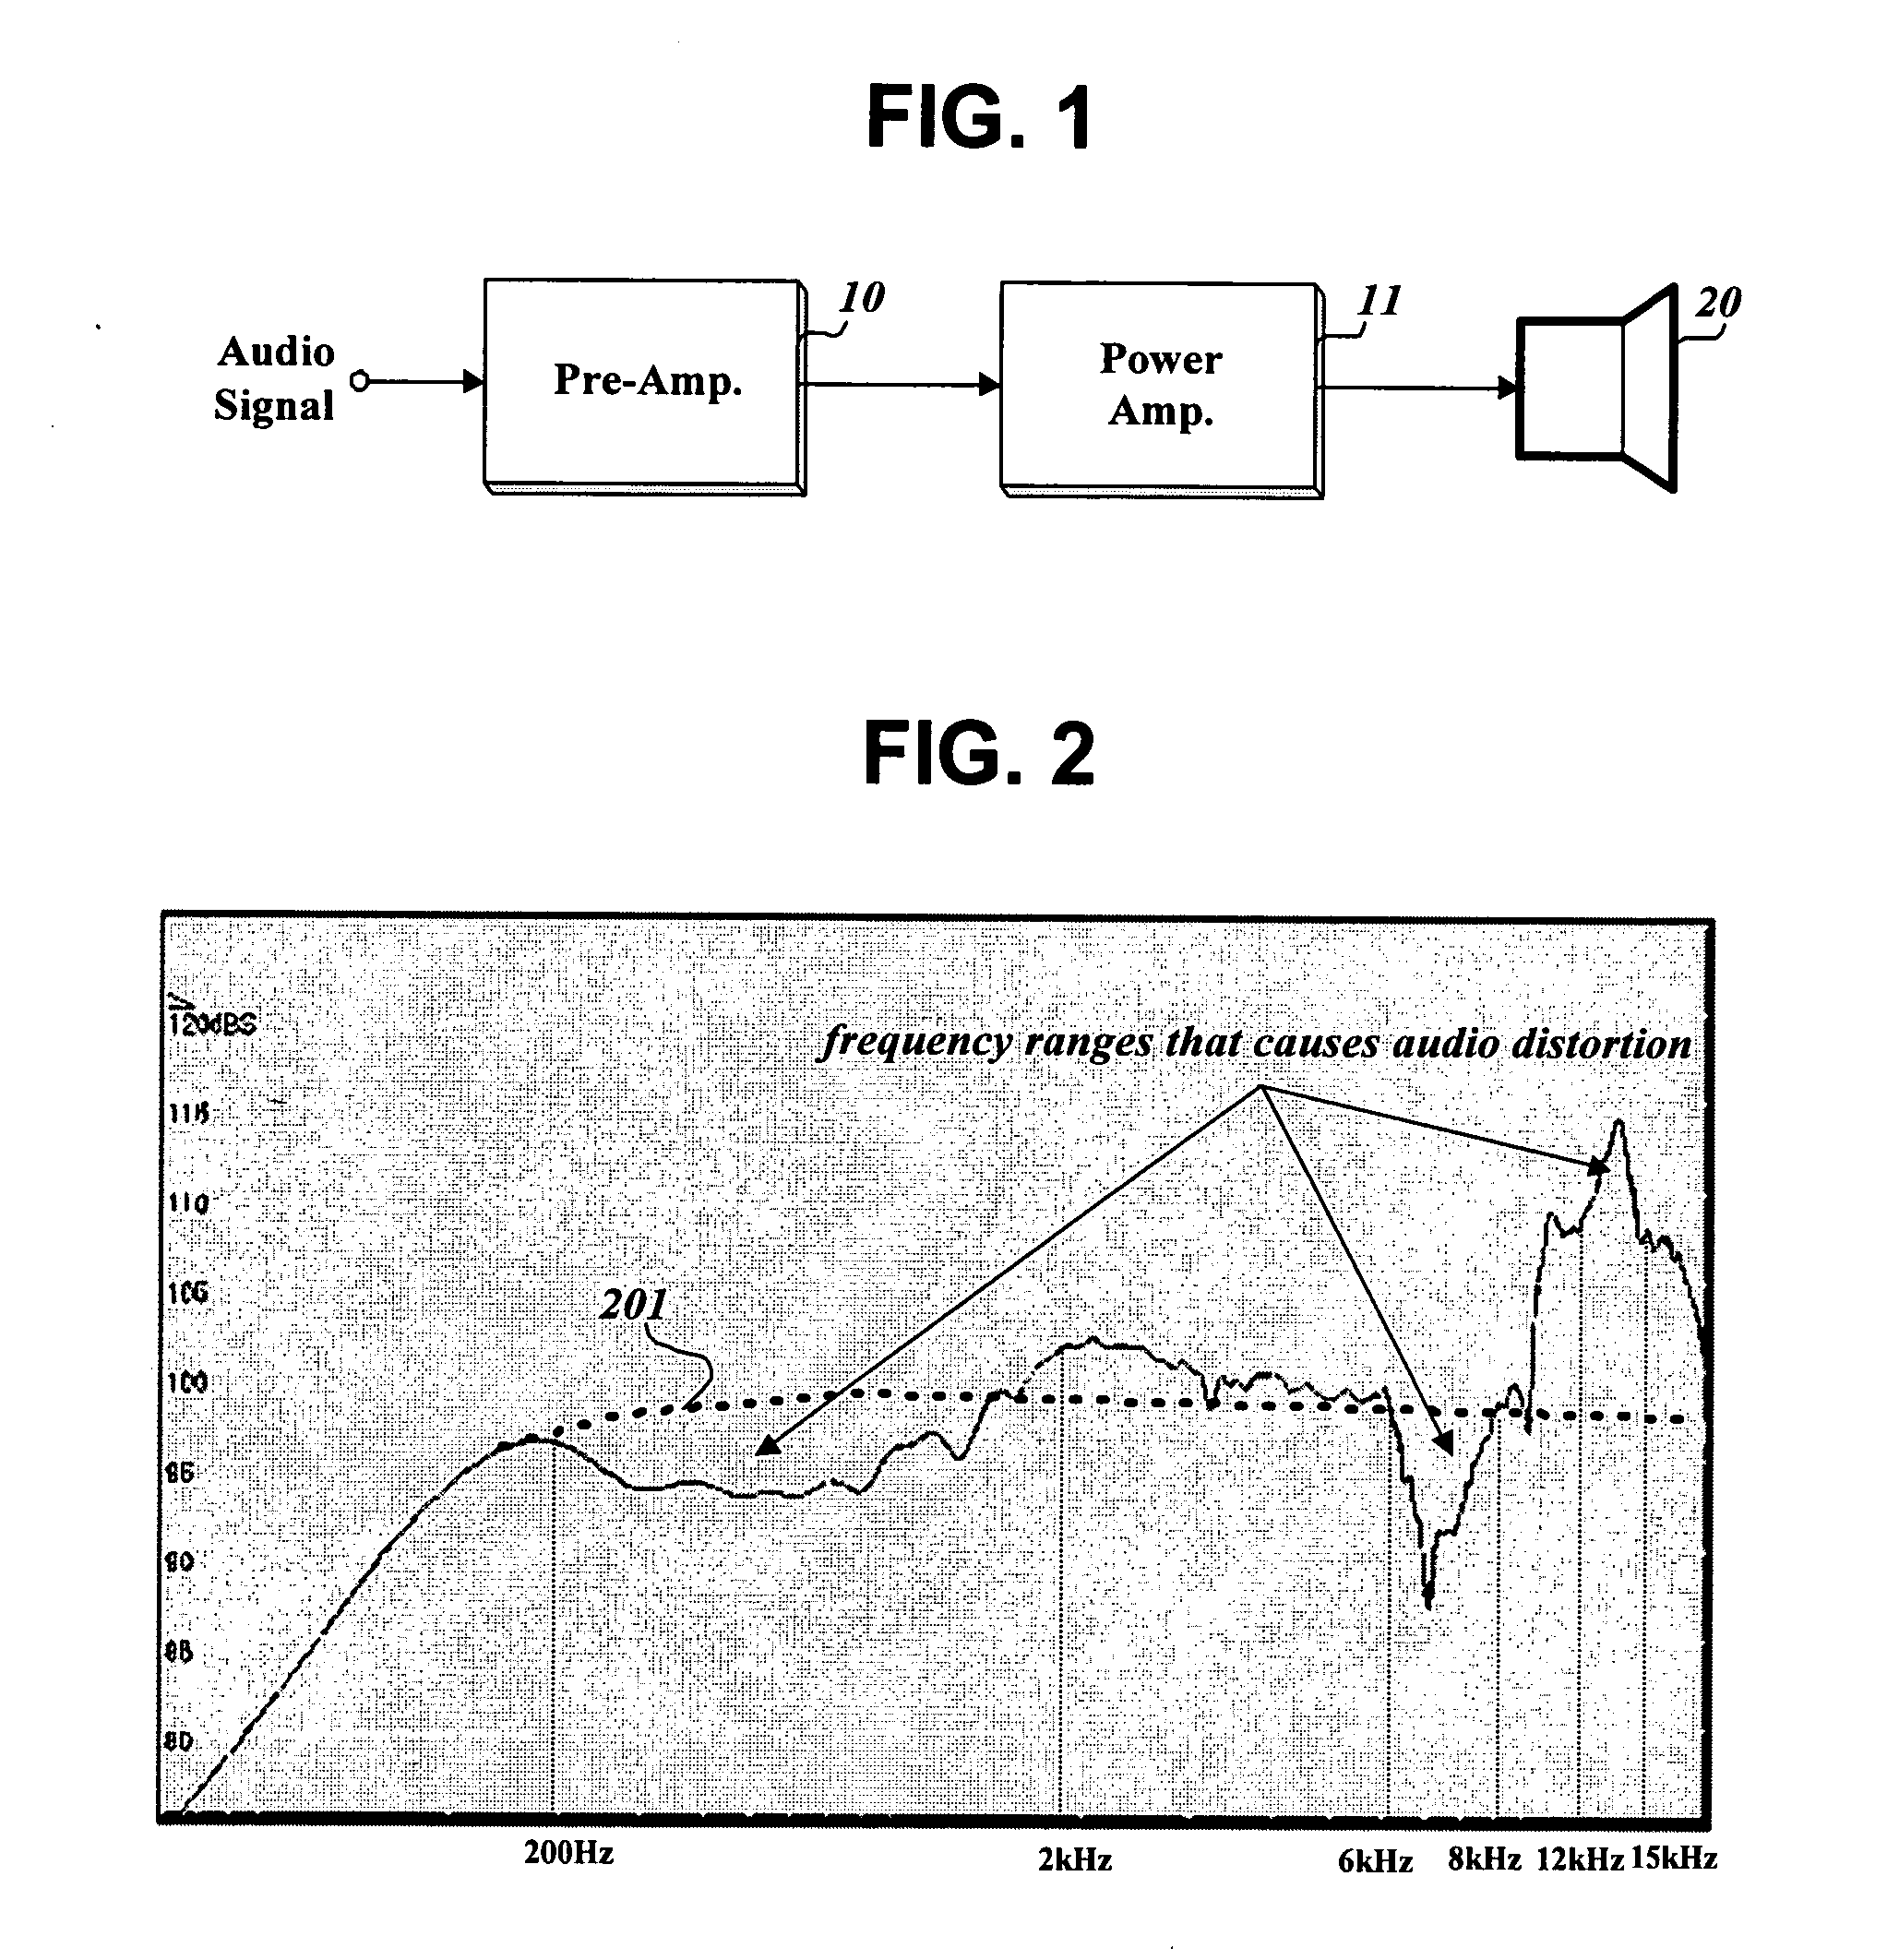 Method and apparatus of compensating for speaker distortion in an audio apparatus